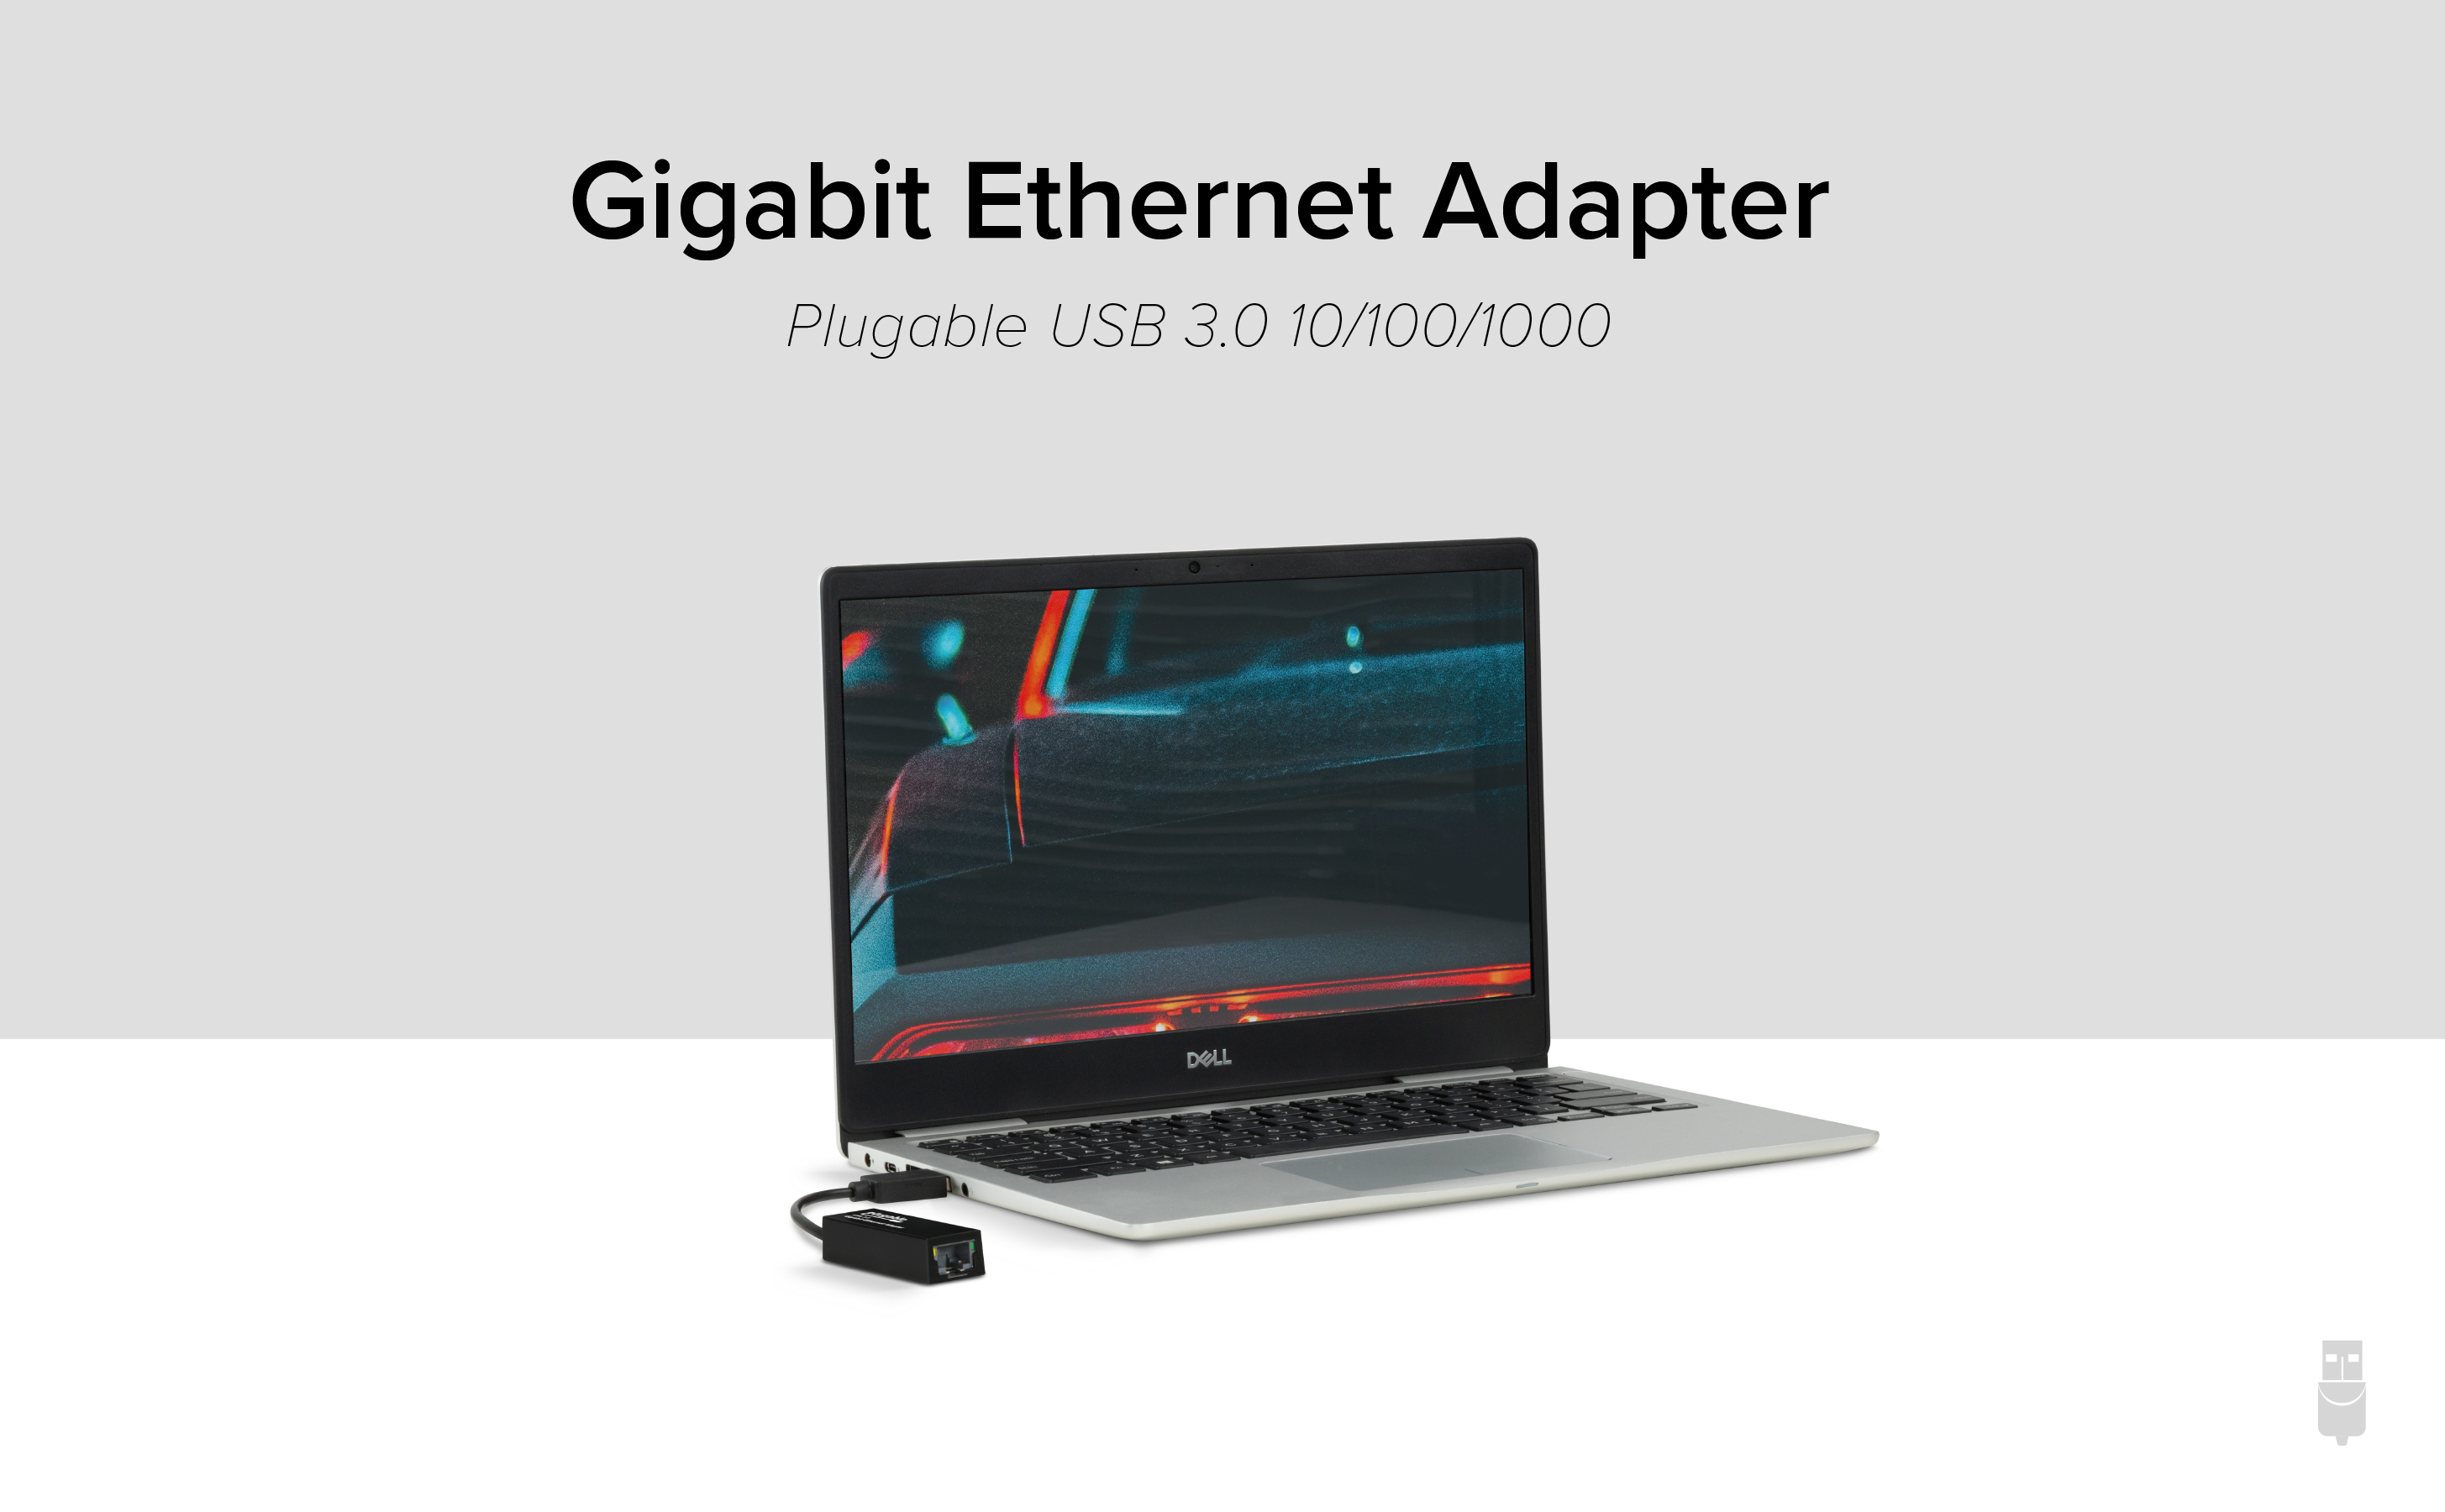 Gigabit Ethernet Adapter - laptop with connected adapter